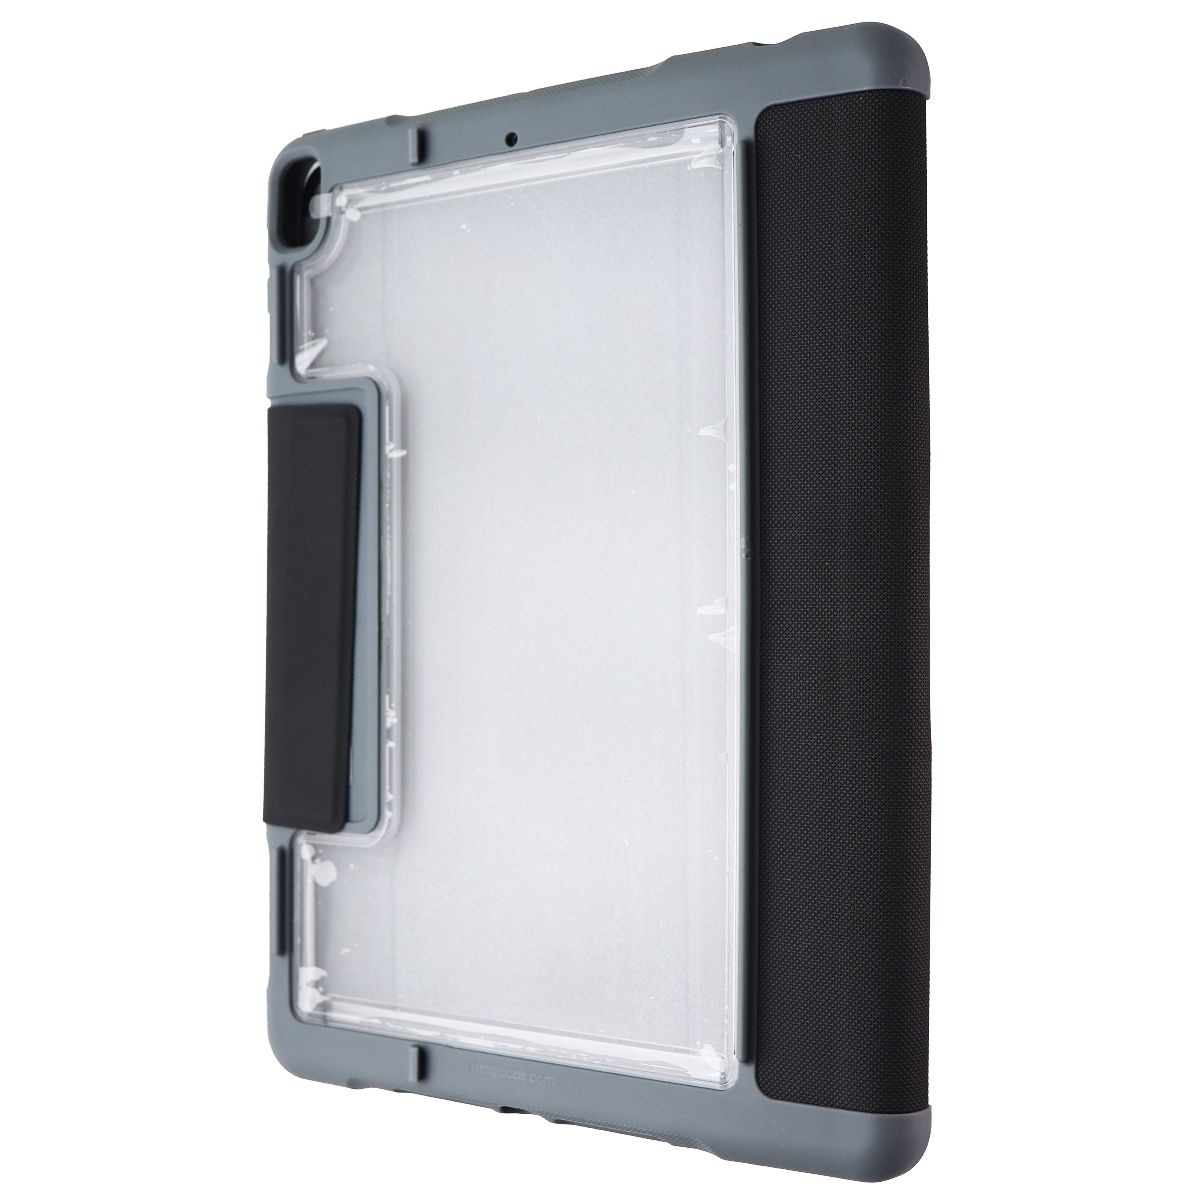 STM Duo Plus Series Hybrid Case For Apple IPad 7th Gen (10.2) - Gray/Clear/Black